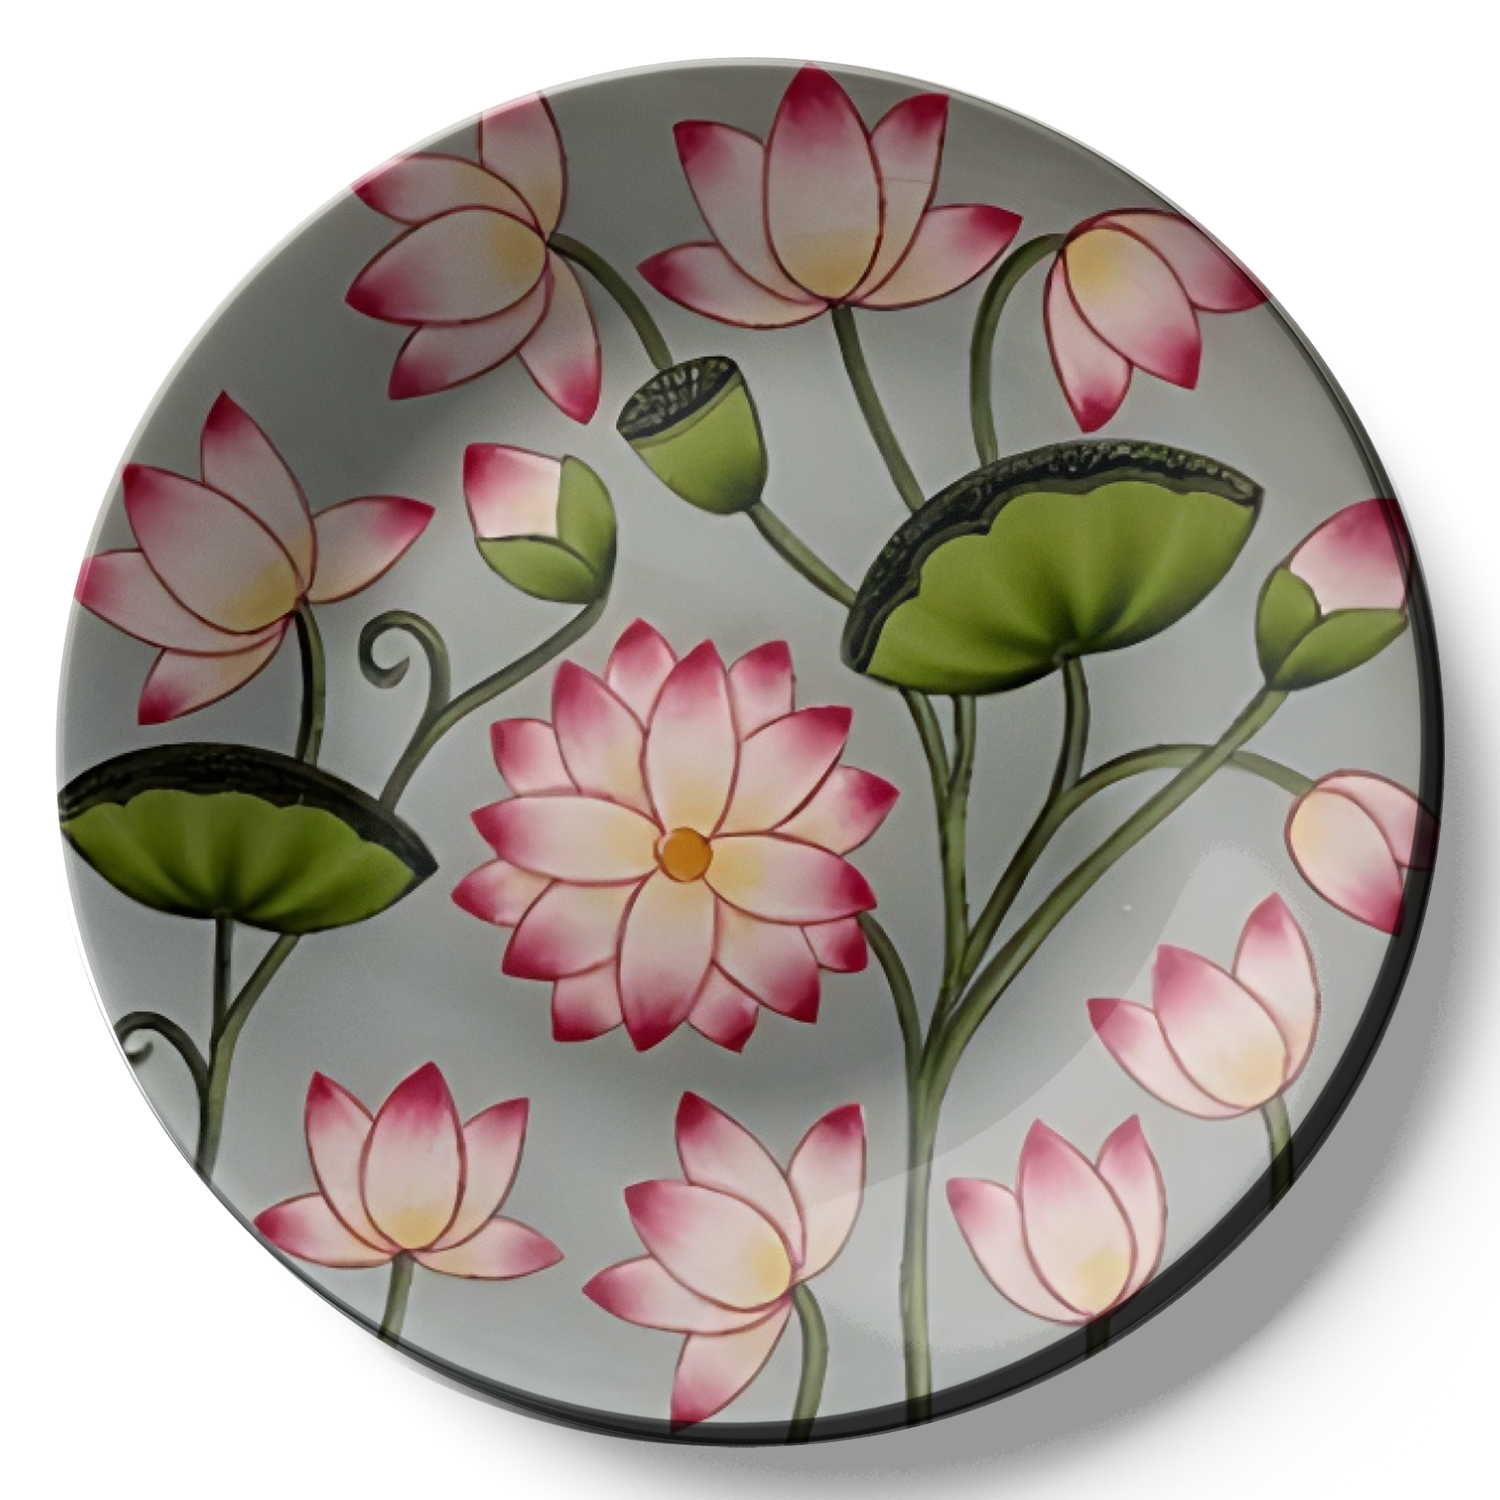 Interior Decoration wall plate art pink lotus and green leaves